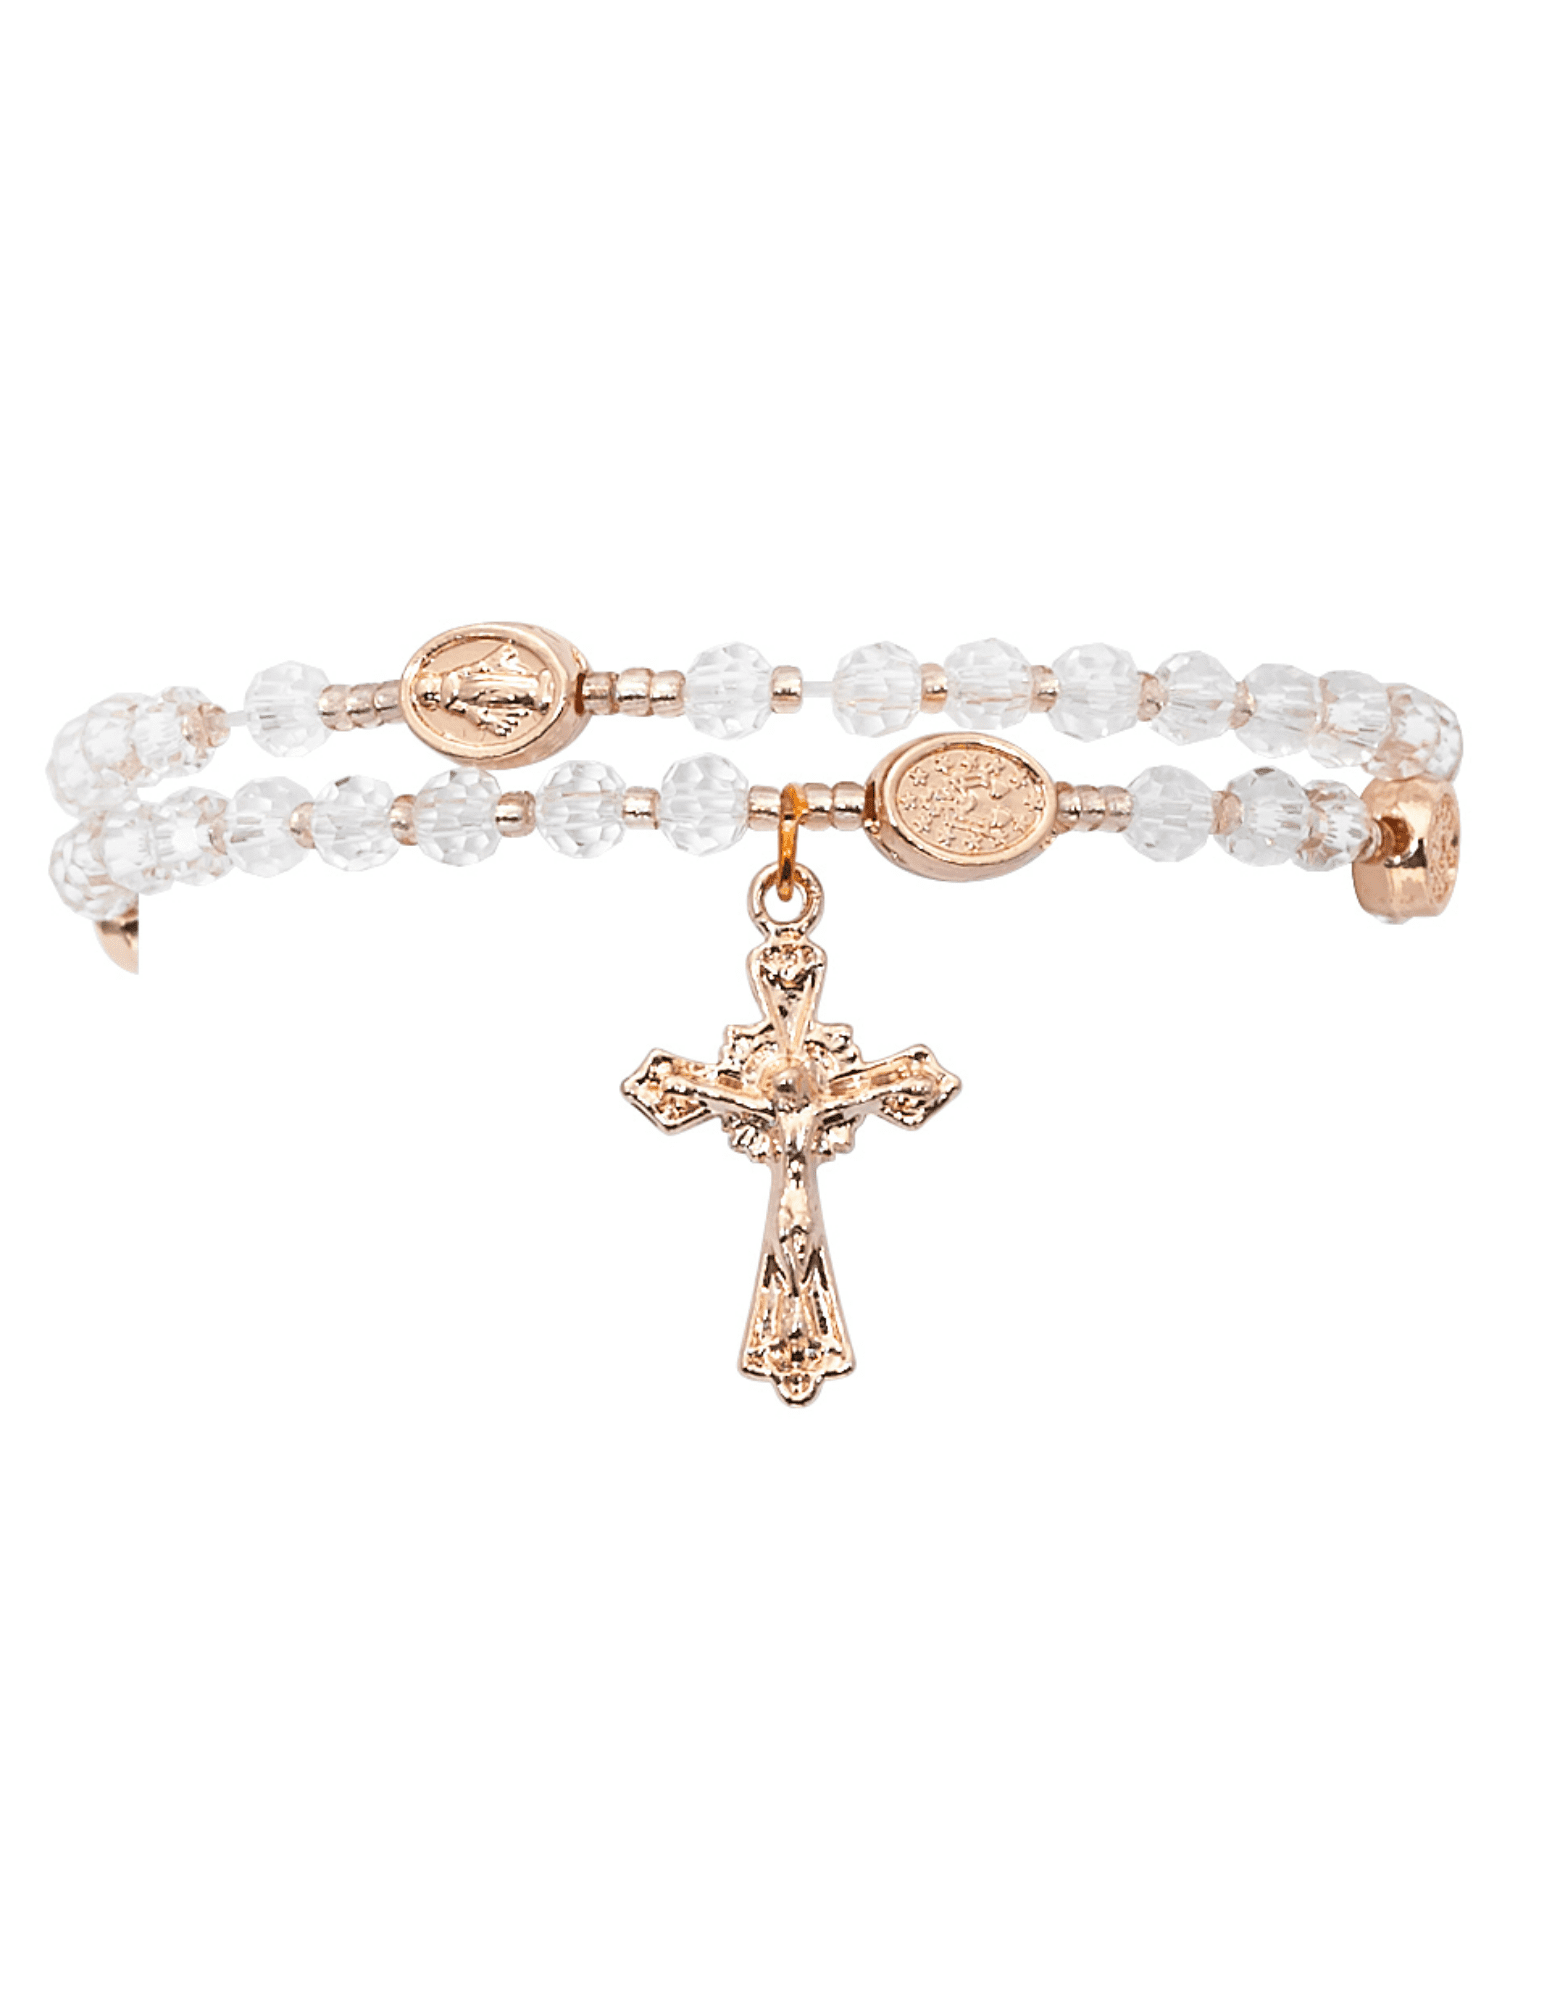 Findings,etc. - The prayer of the Rosary is said to be our link to heaven.  Wrap this rosary bracelet around your wrist as a reminder to stop and pray  along the way,